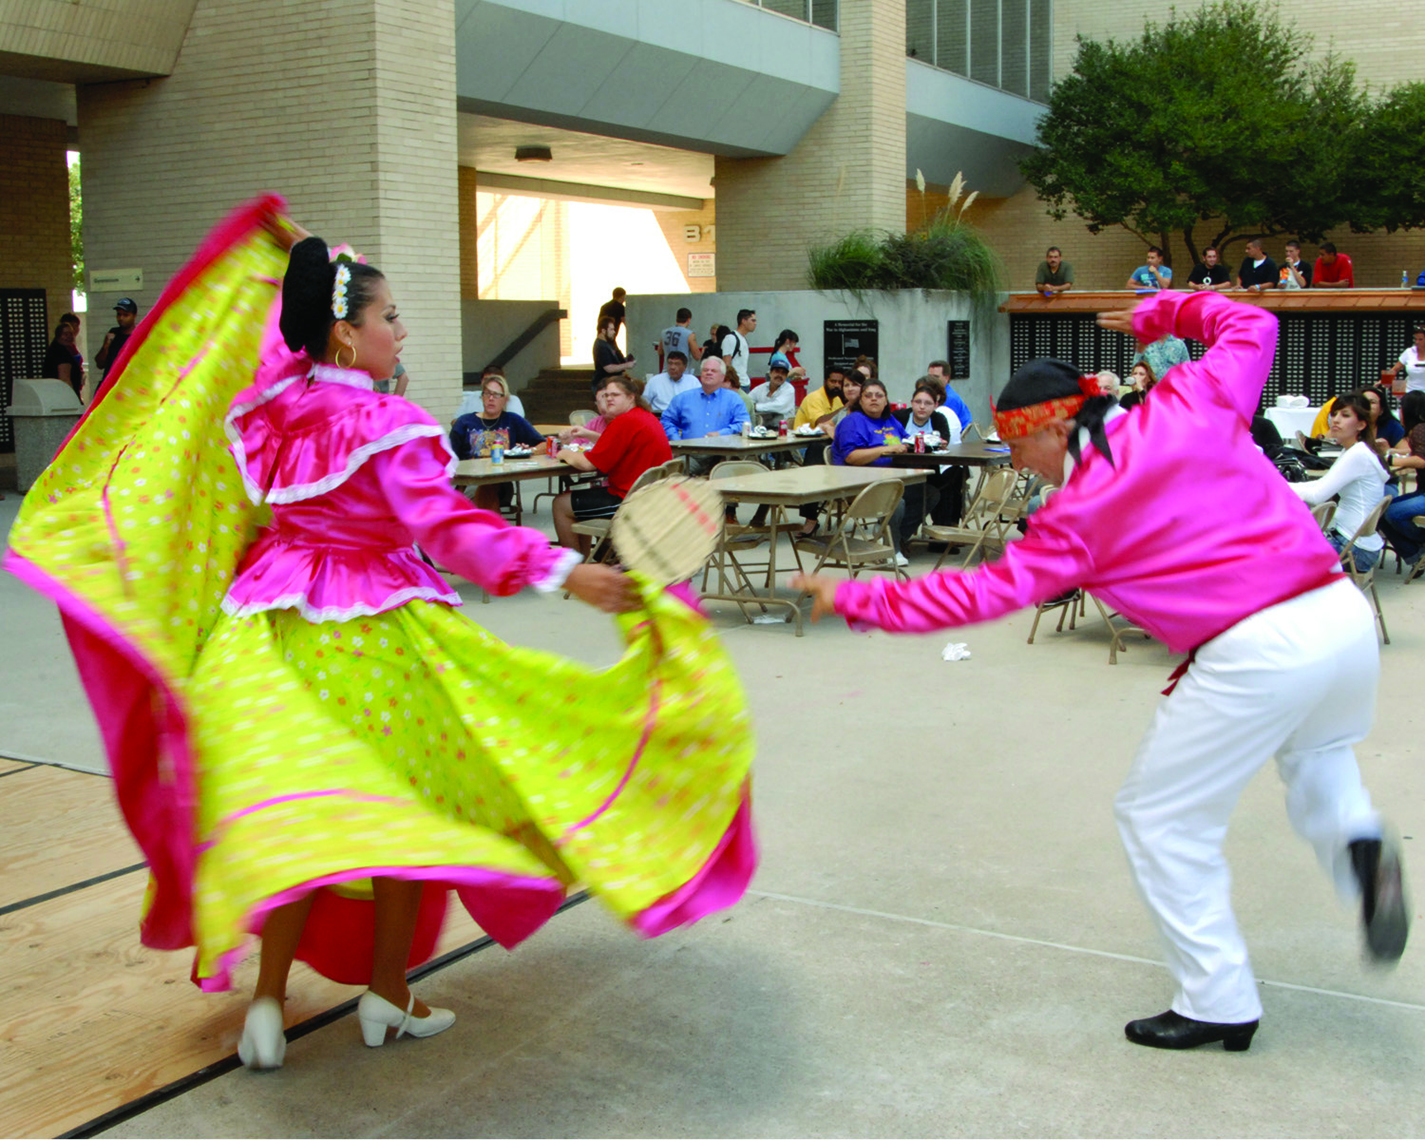 From Sept. 15 to Oct. 15, campuses will have an array of events in honor of Hispanic culture that will include dancers and guest speakers.